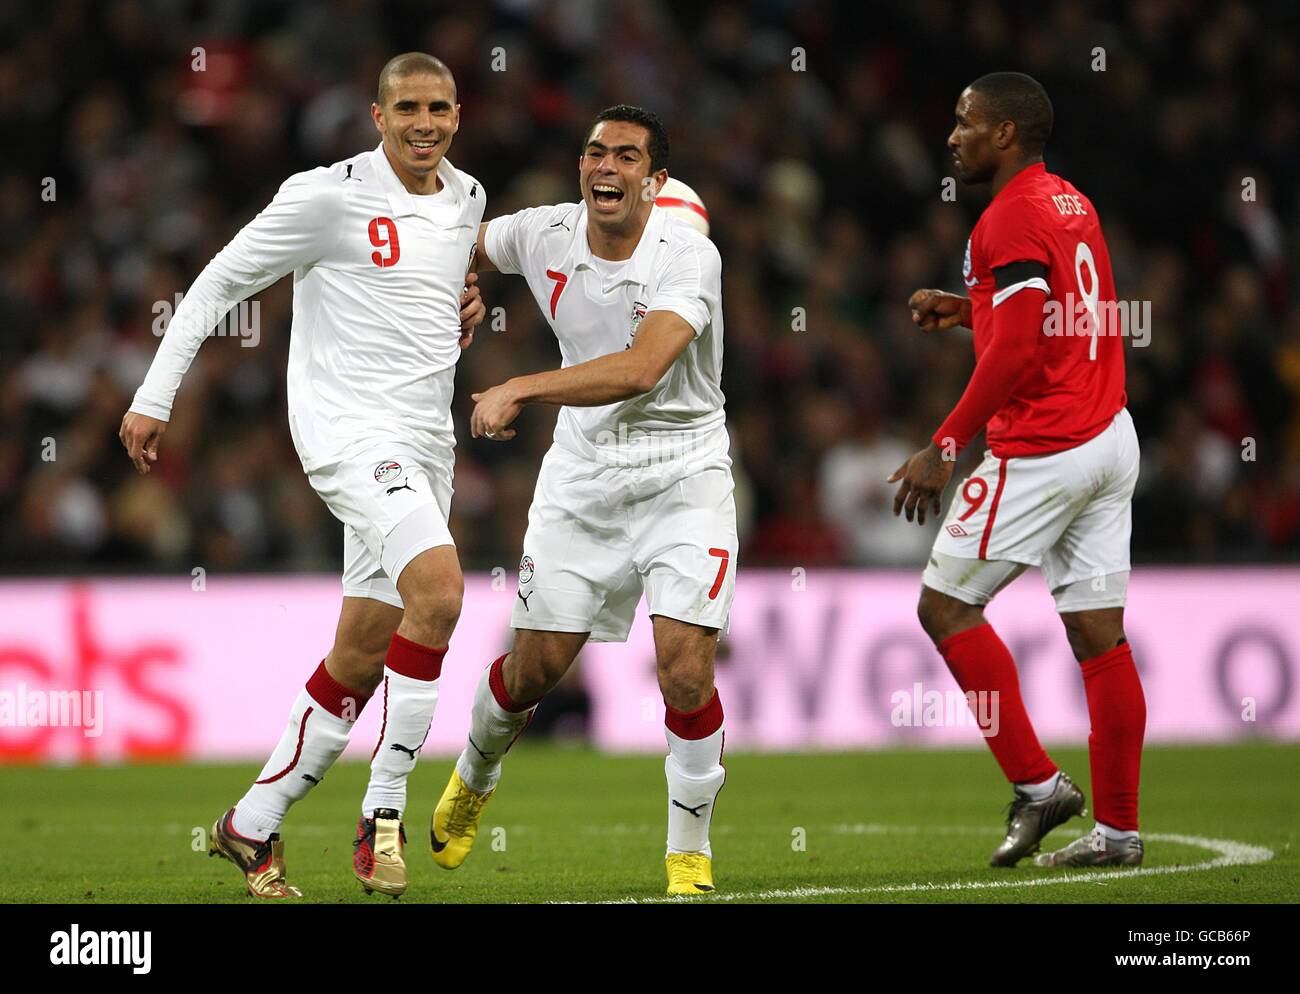 Egypt's Mohamed Zidan (left) celebrates with team mate Ahmed Fathi after scoring his side's first goal of the game, as England's Jermain Defoe looks on Stock Photo